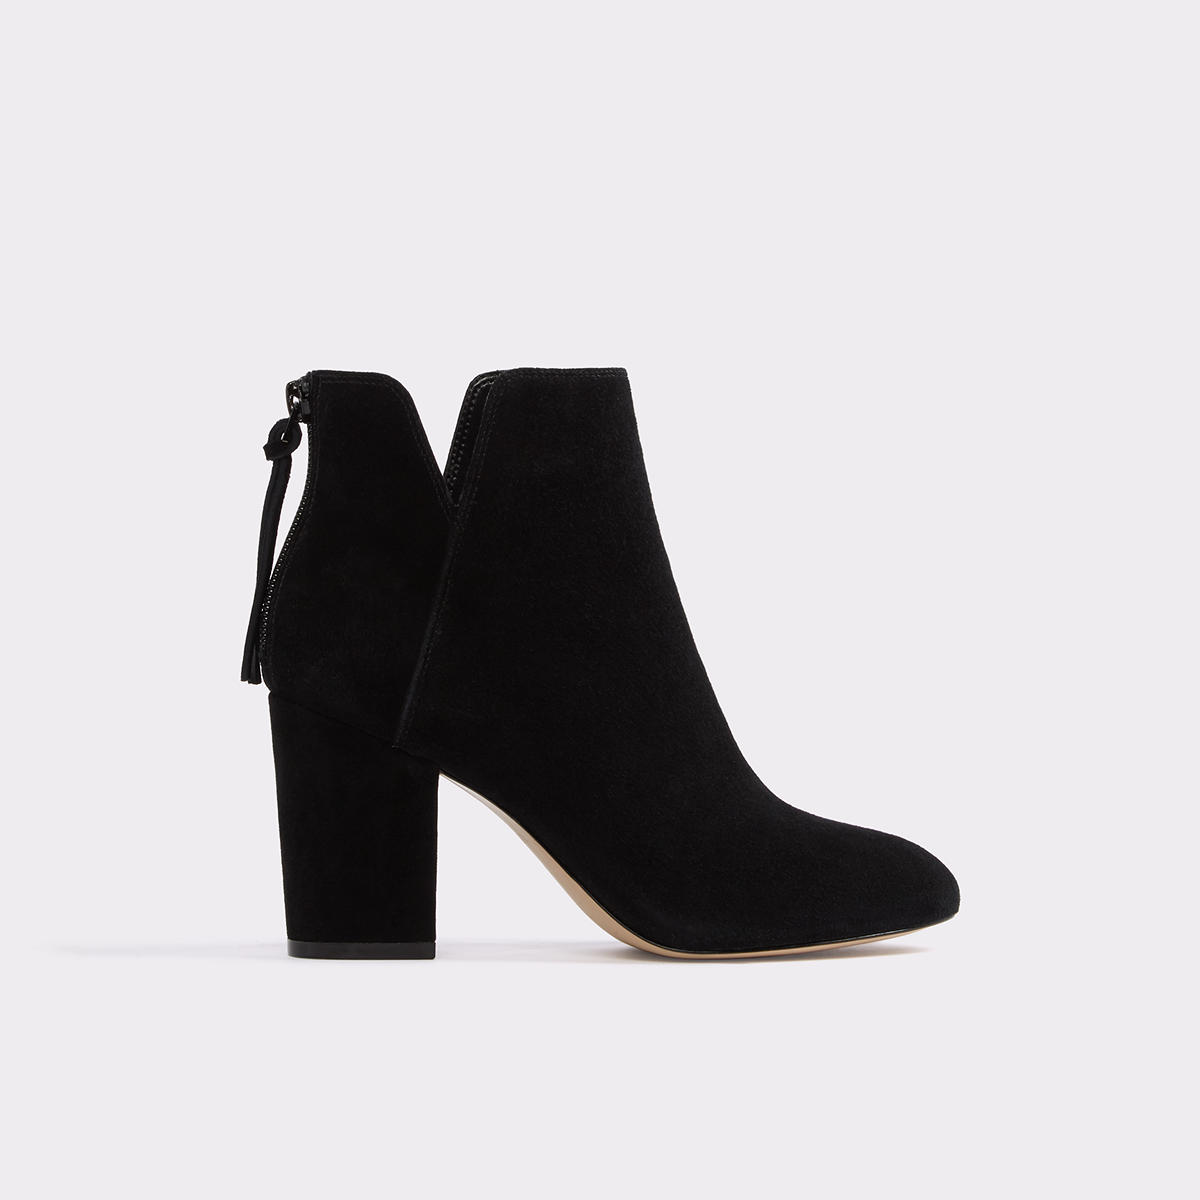 Dominicaa Black Leather Suede Women's 